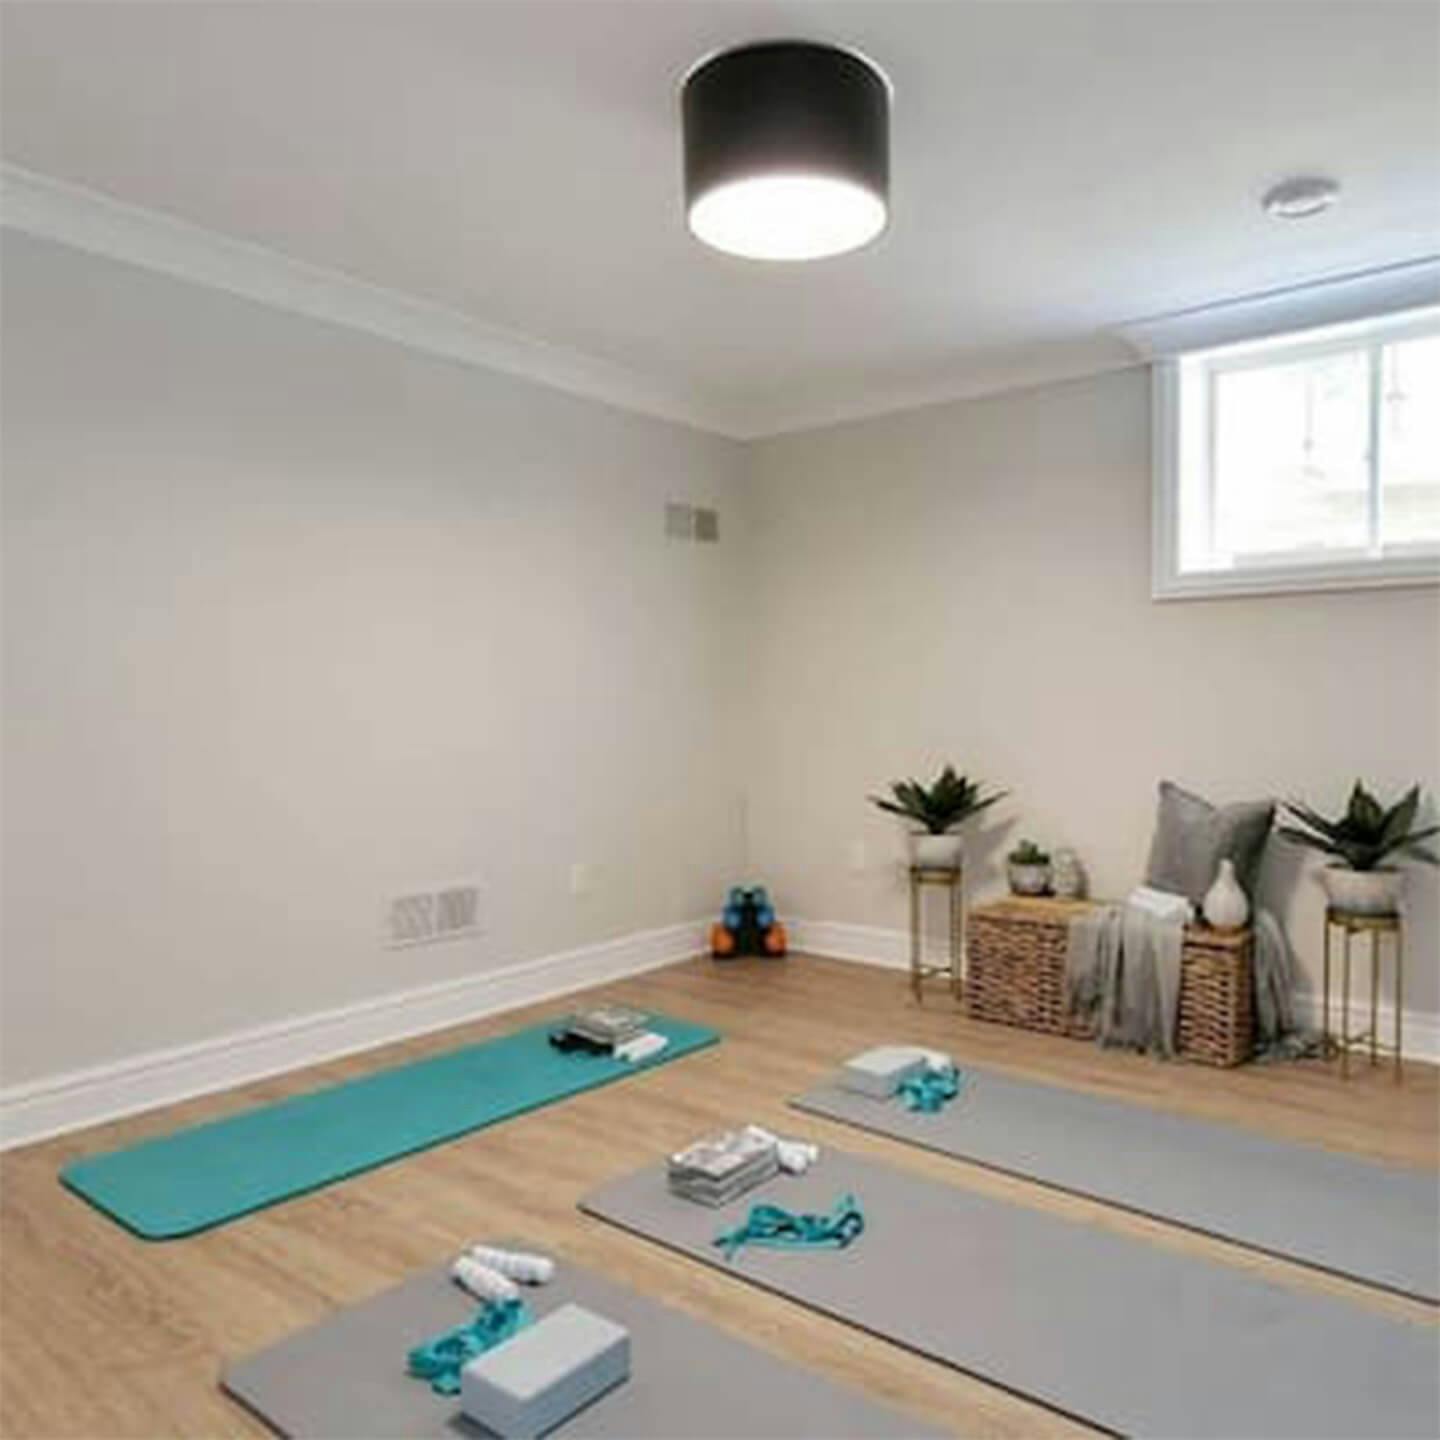 A room with 3 student yoga mats and 1 instructor yoga mat laid out